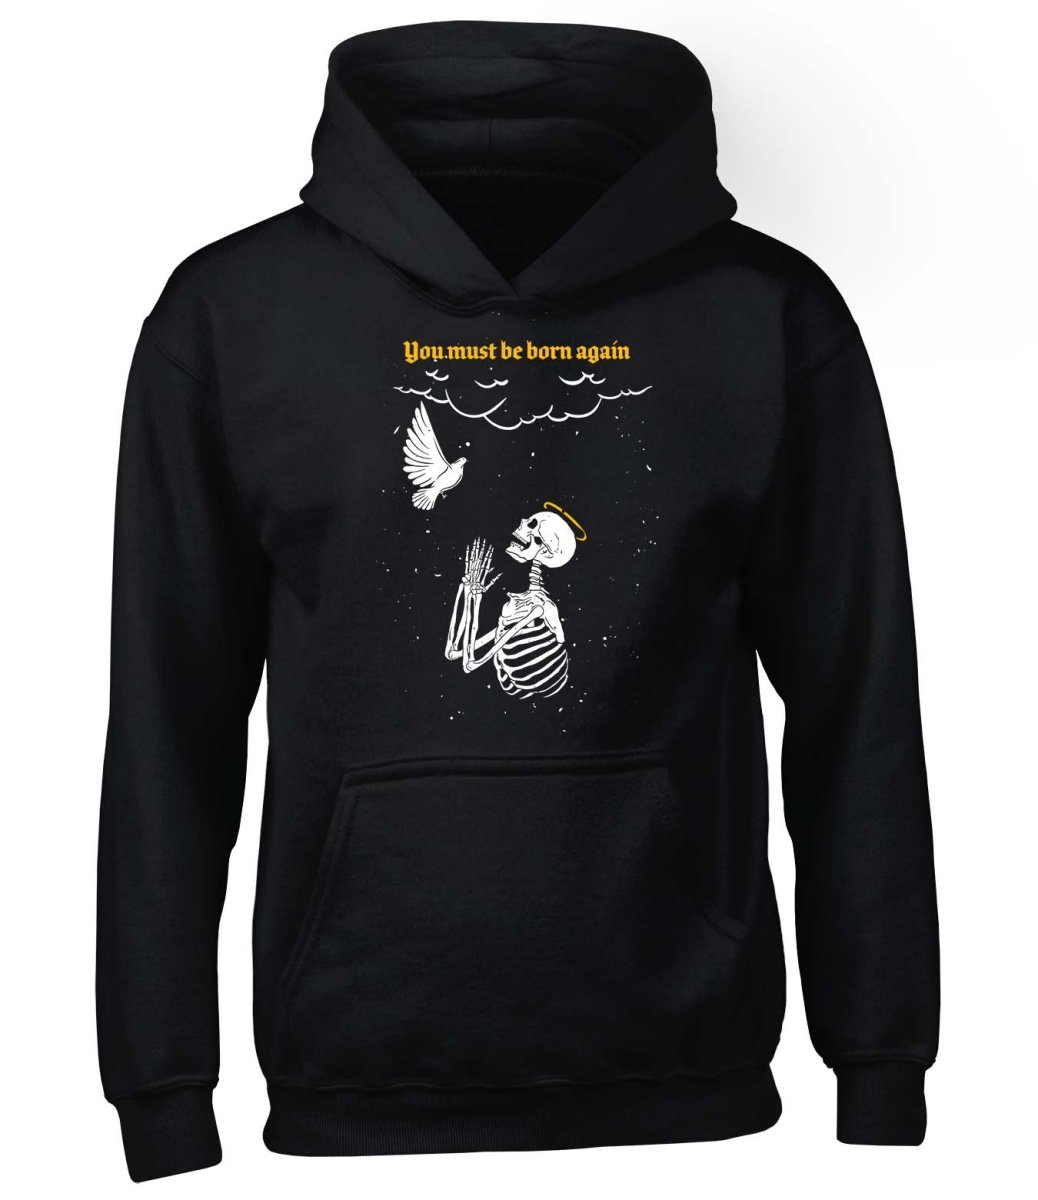 Hoodie - Born Again - Hoodie - The Reformed Sage - #reformed# - #reformed_gifts# - #christian_gifts#